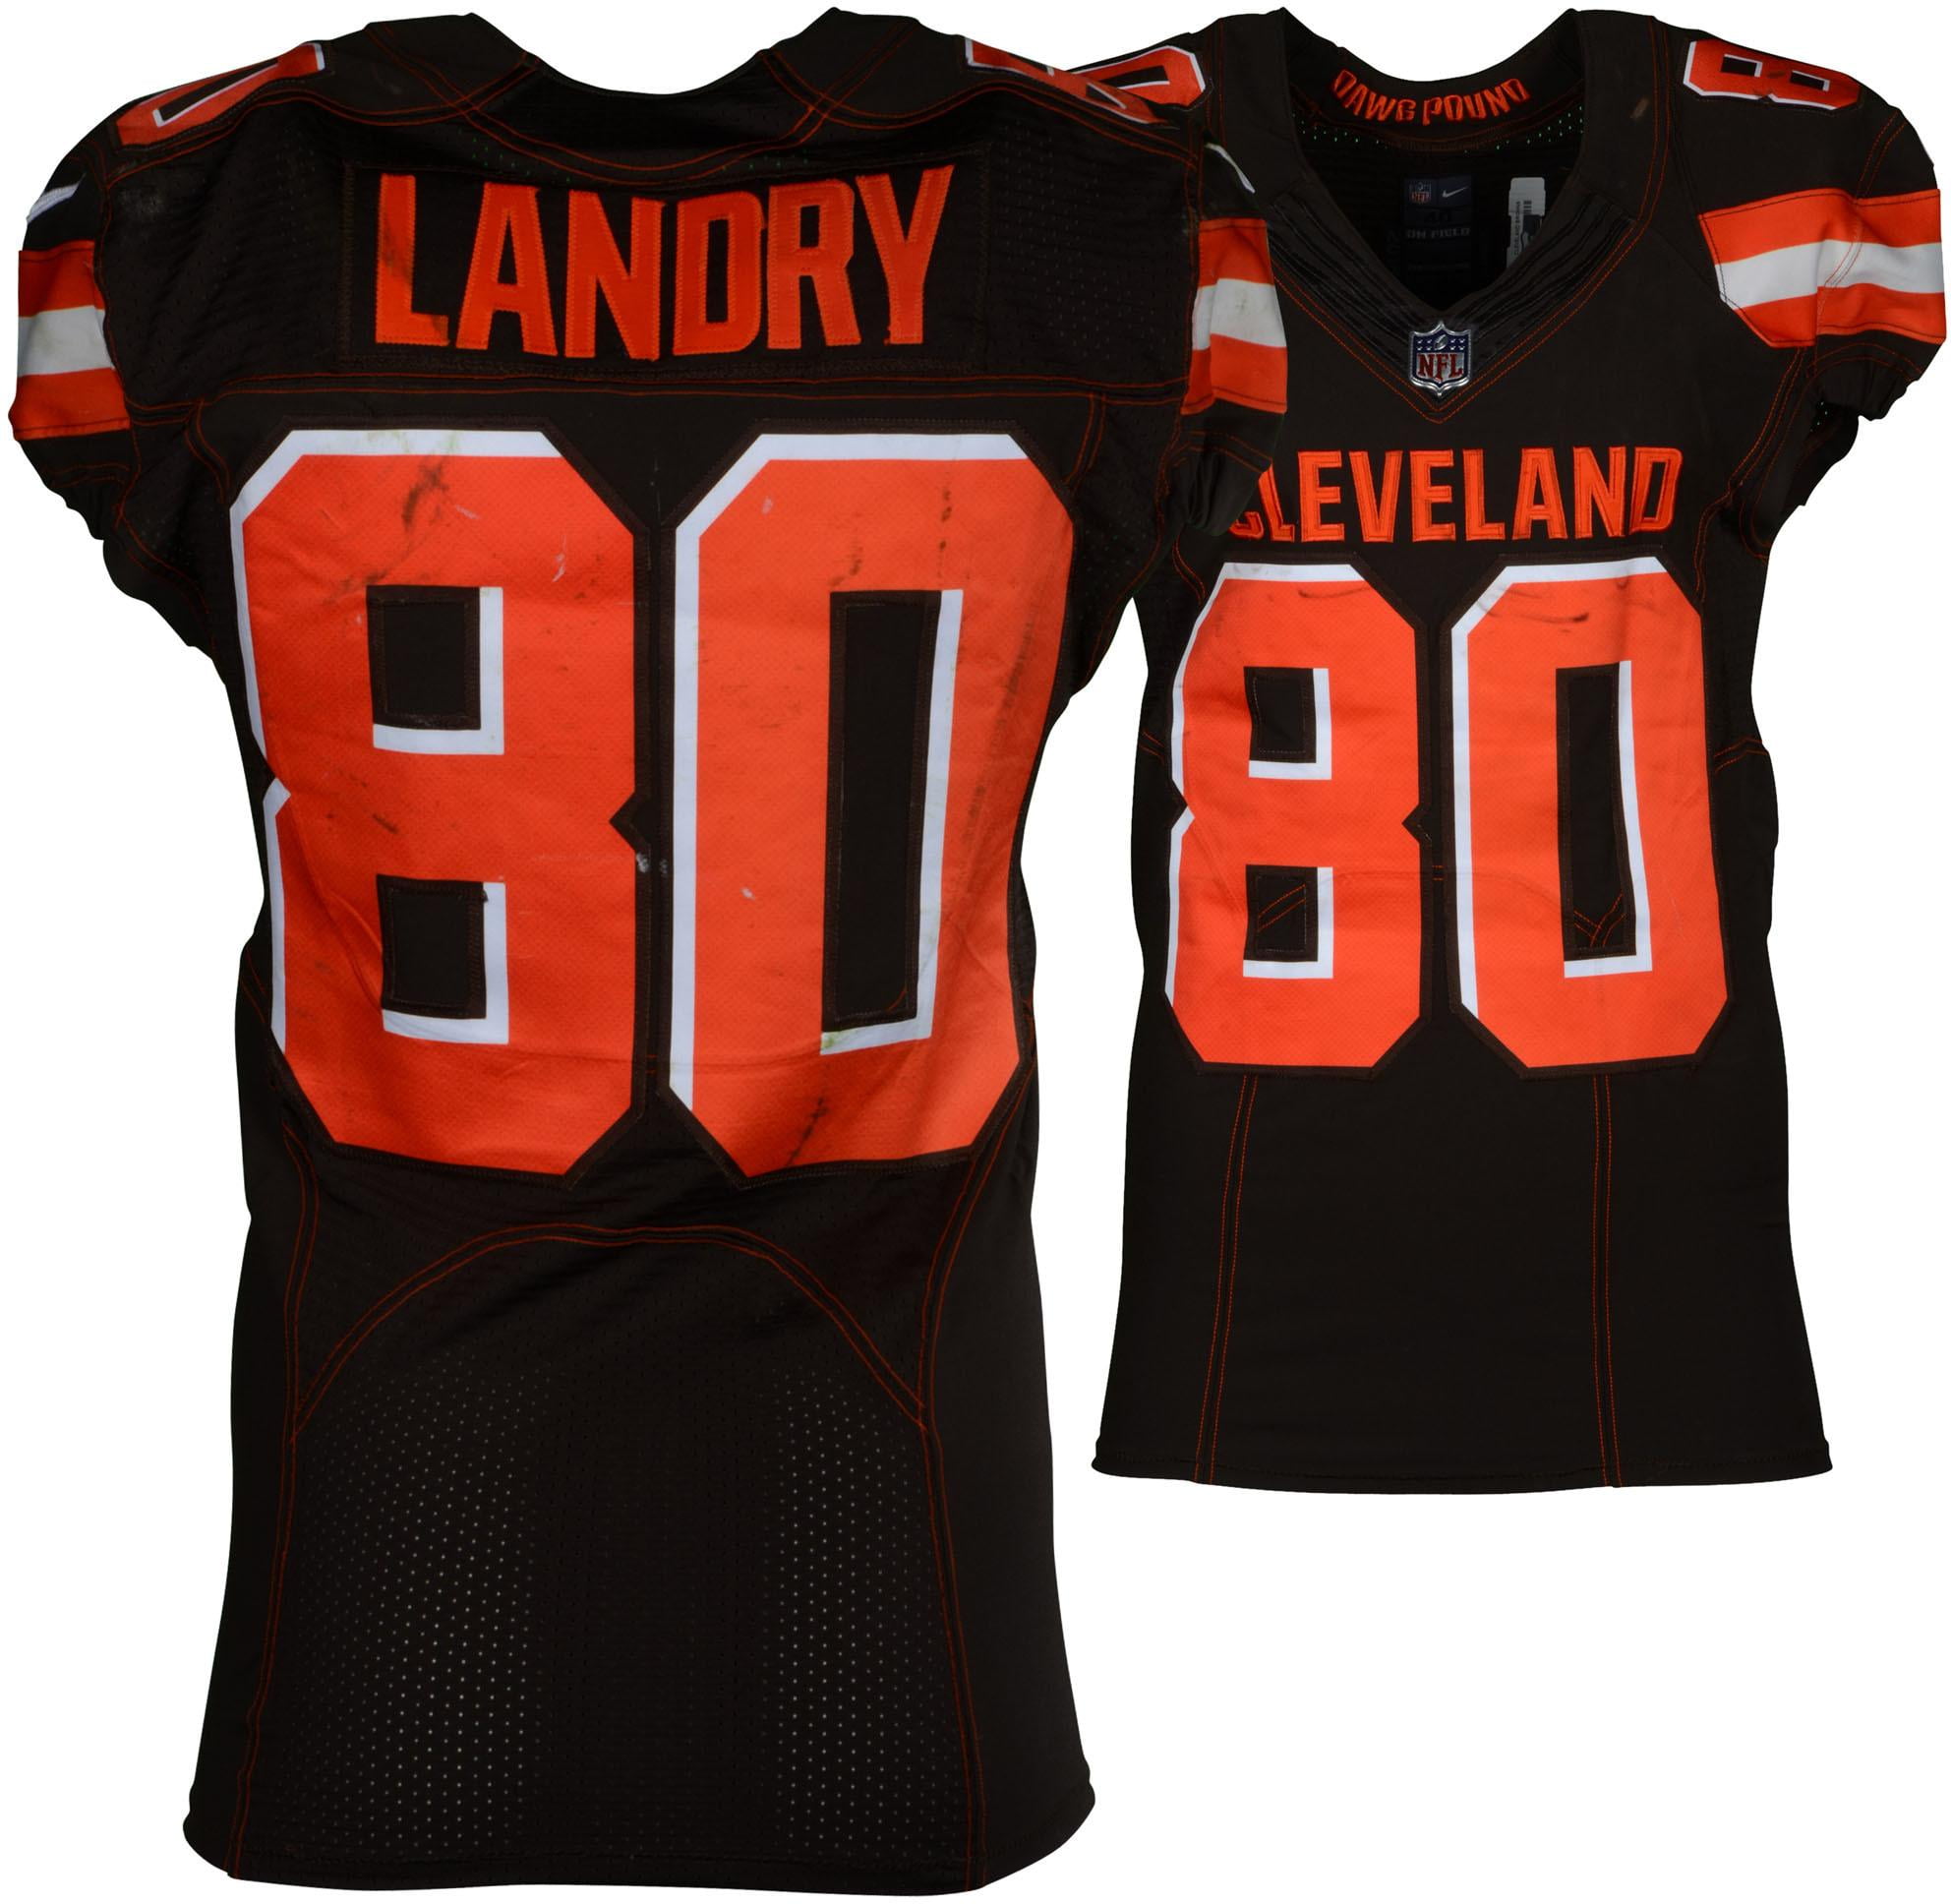 jarvis landry cleveland browns jersey